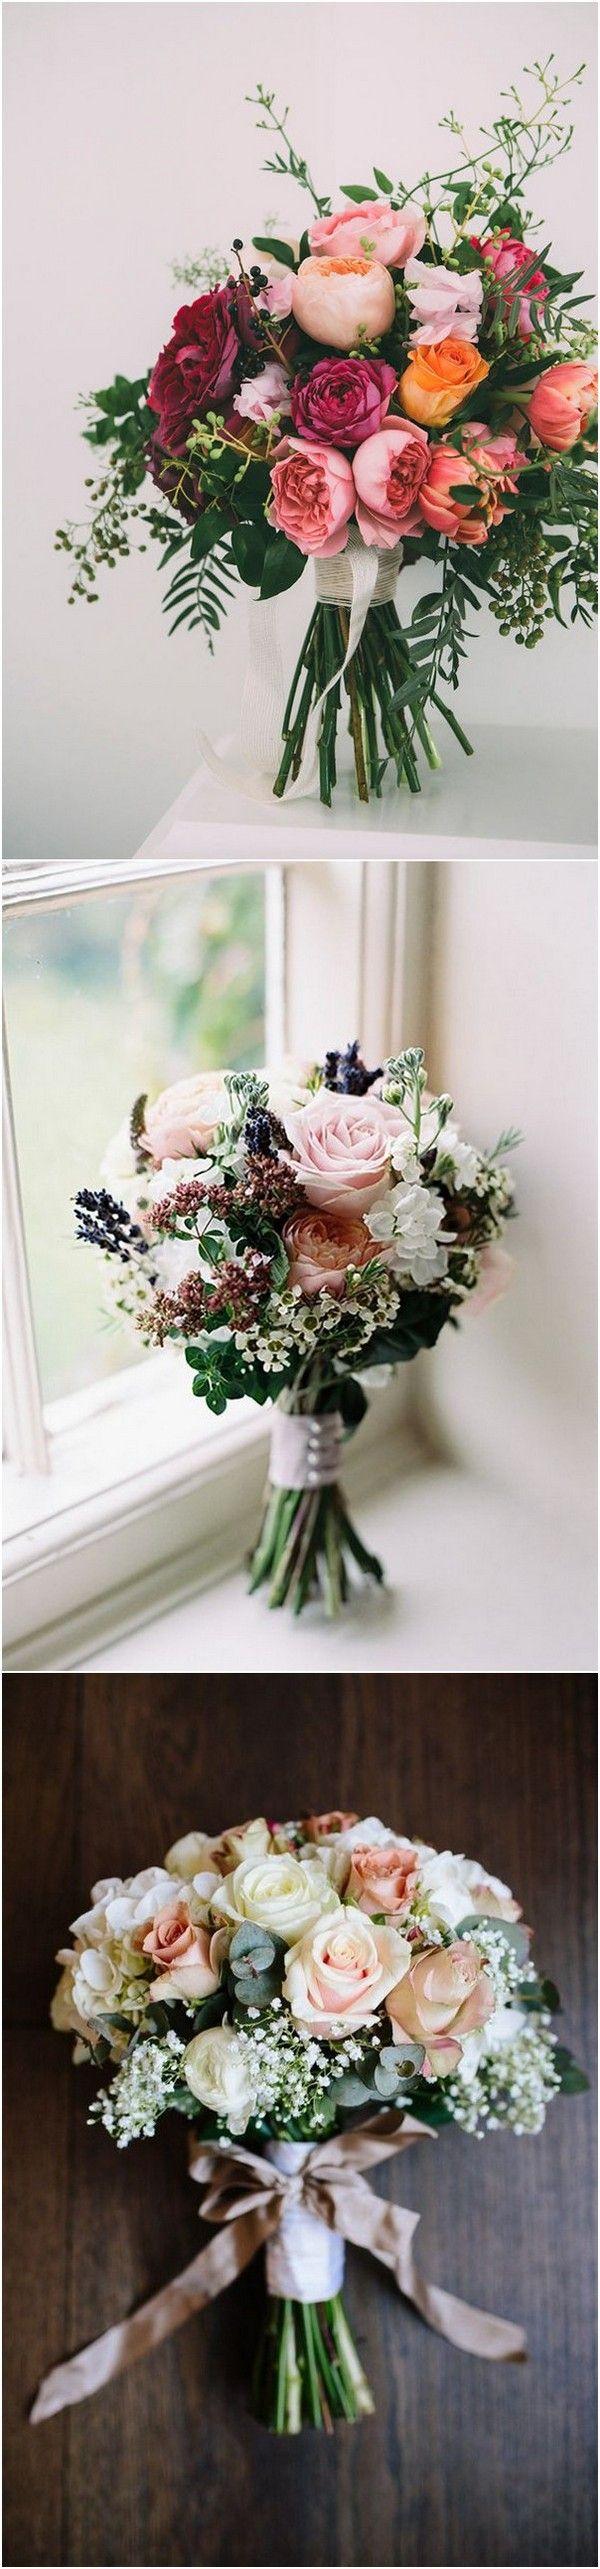 Mariage - 15 Stunning Wedding Bouquets For 2018 - Page 2 Of 2